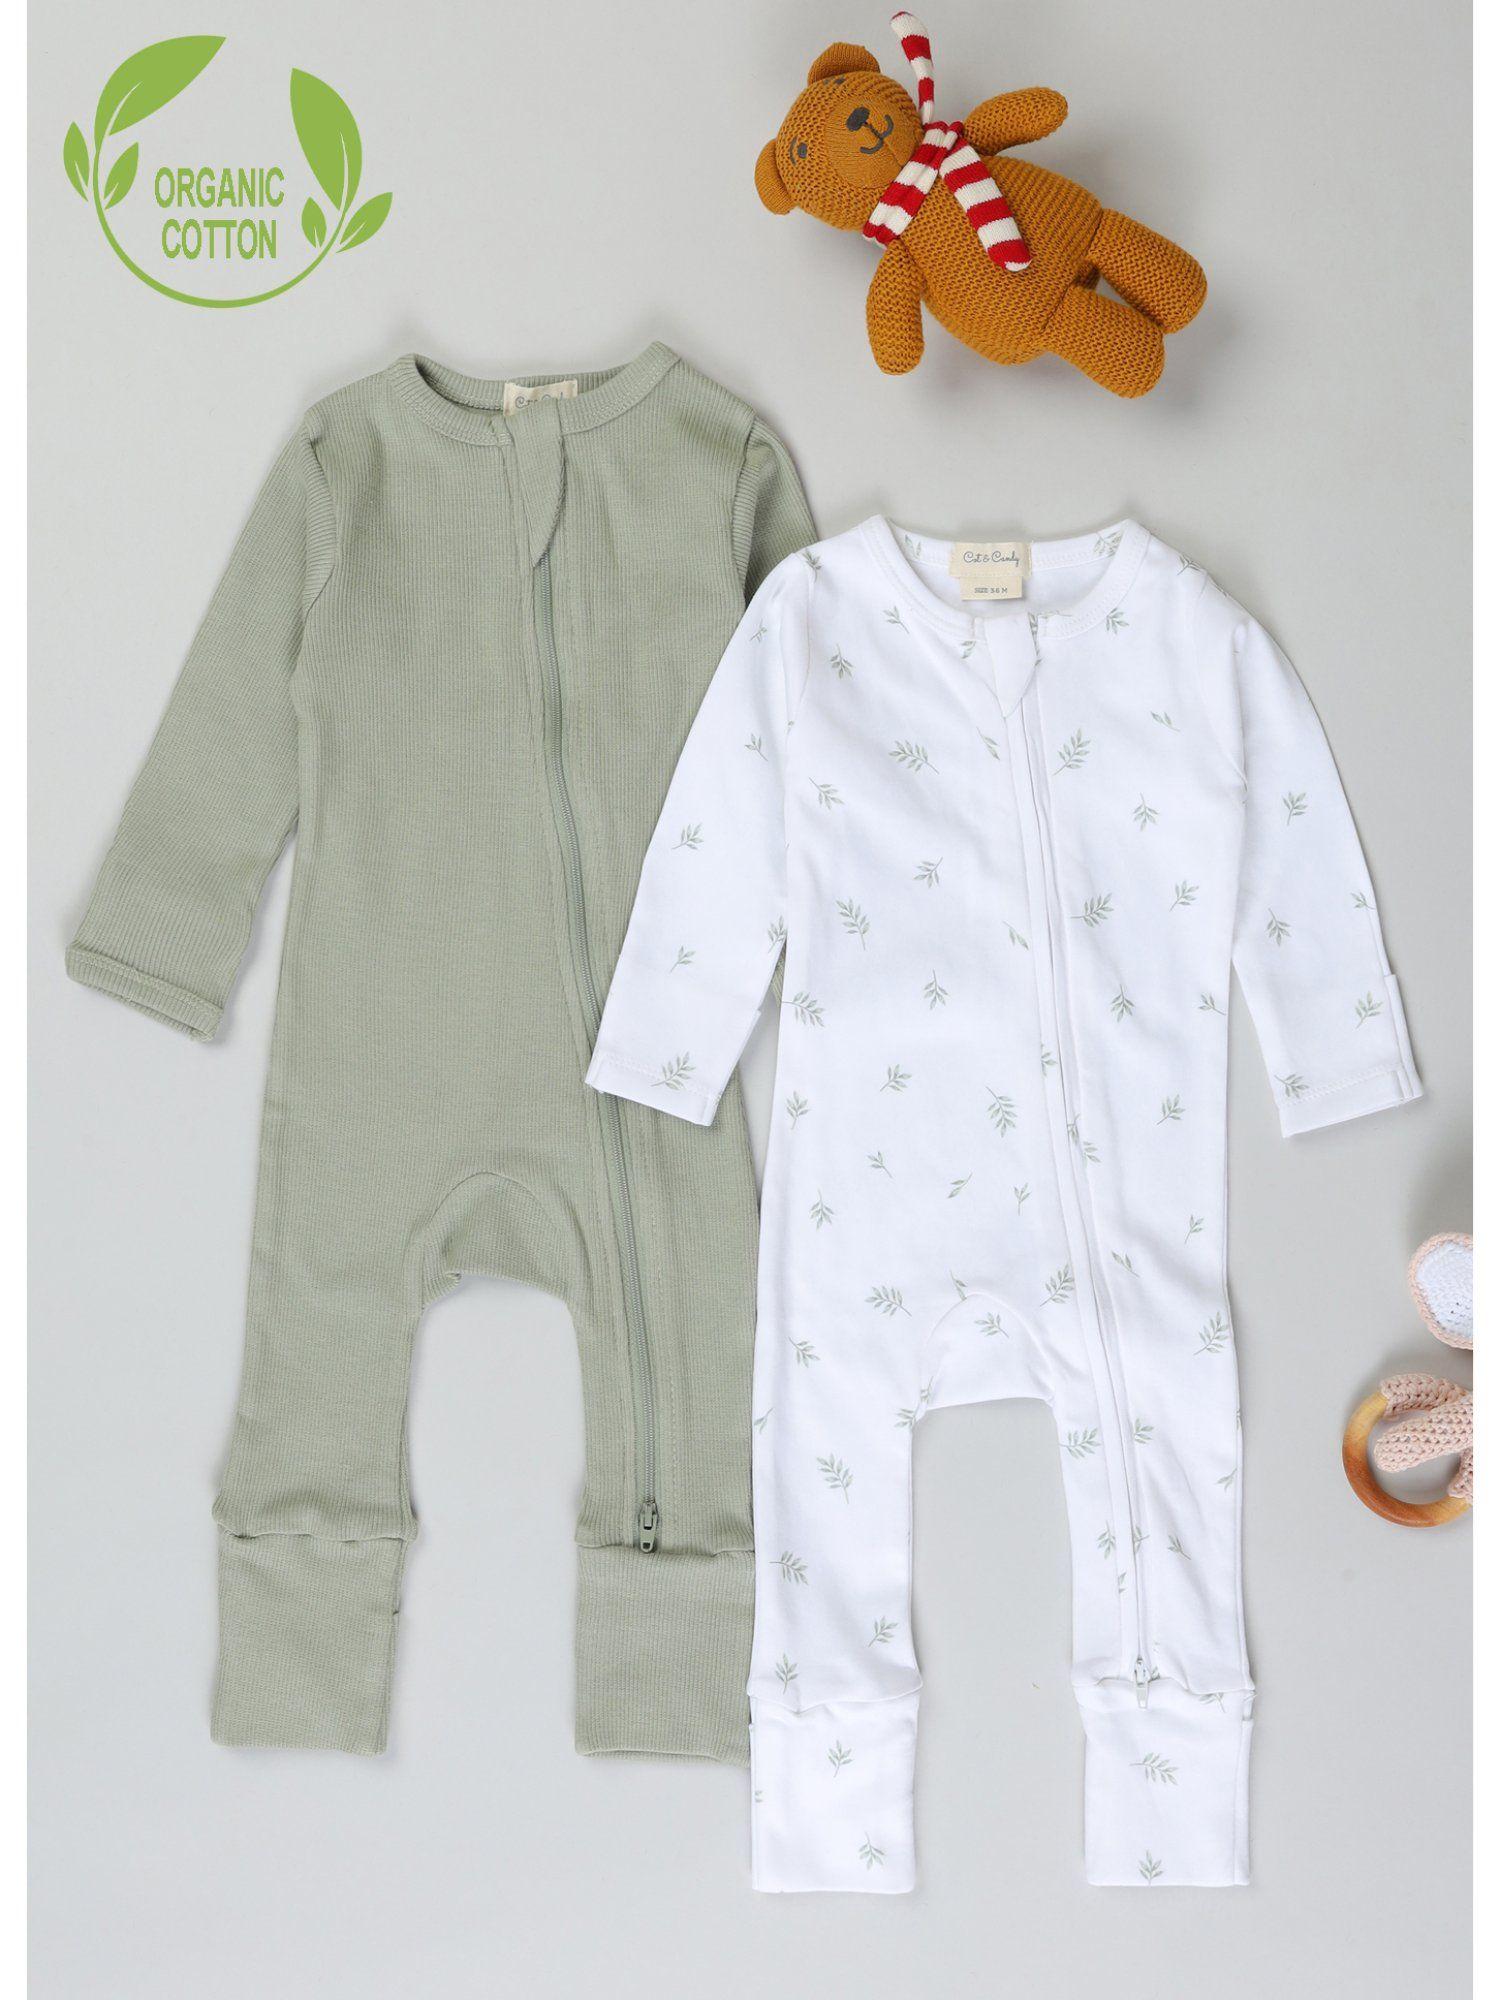 Full Sleeve Organic Cotton Kids Printed Zipsuit (Pack of 2)